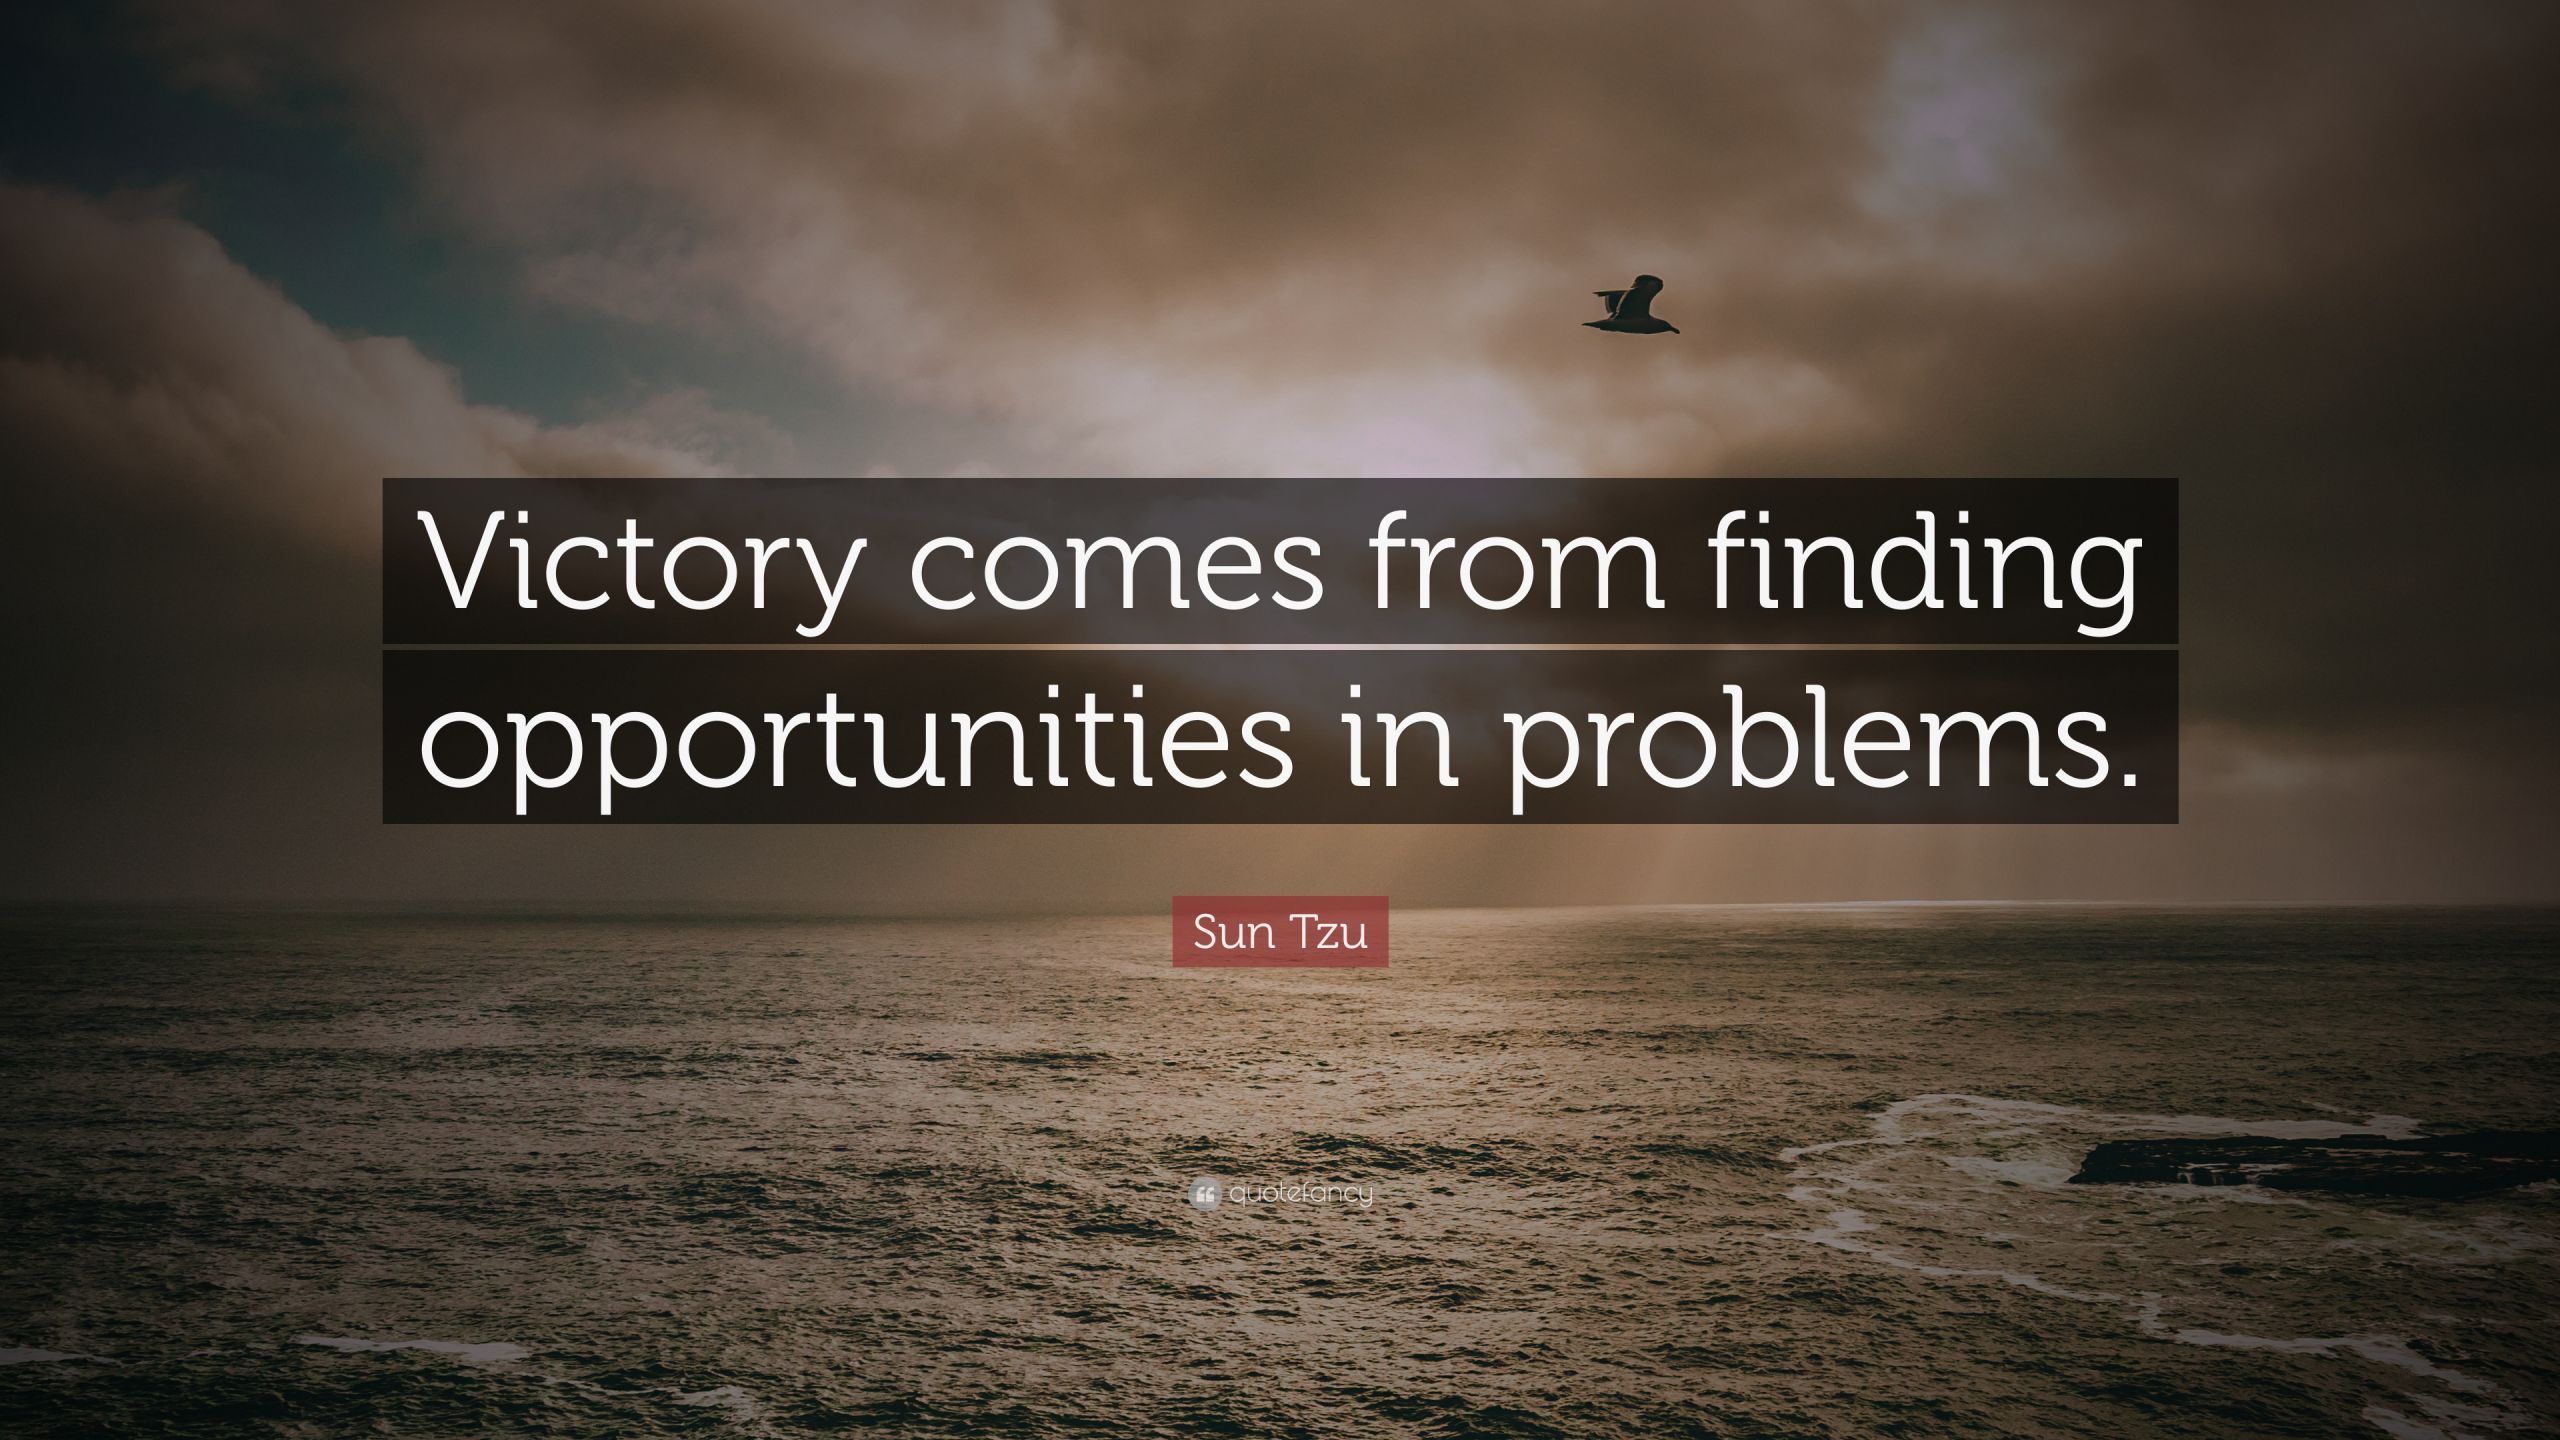 Sun Tzu Quotes Leadership
 Sun Tzu Quote “Victory es from finding opportunities